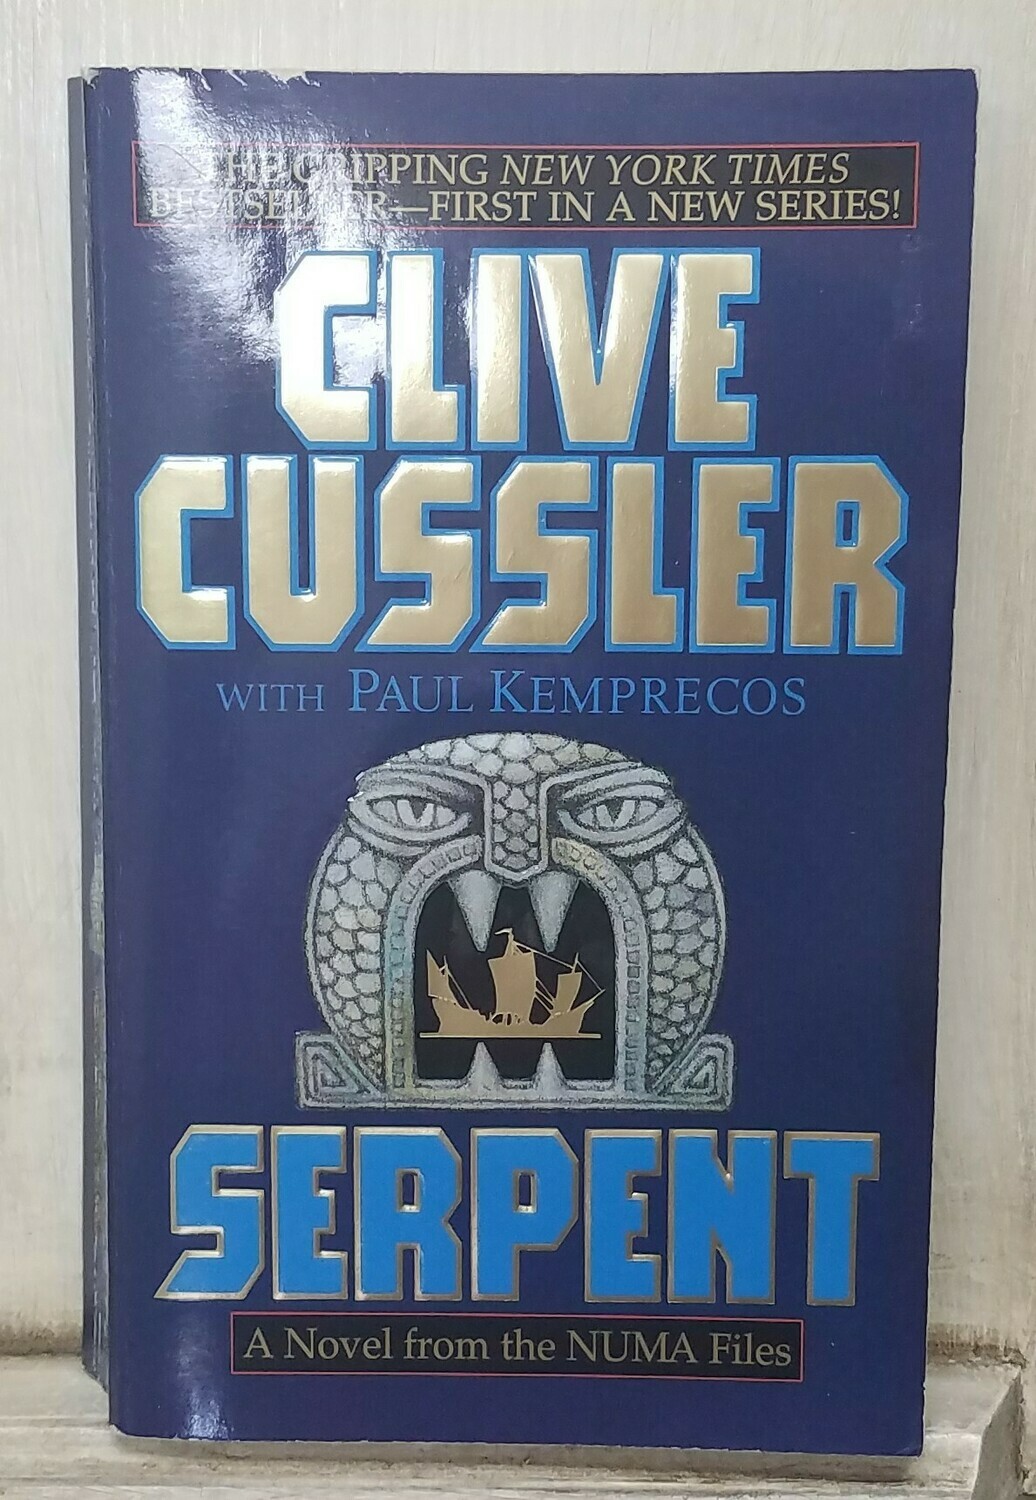 Serpent by Clive Cussler with Paul Kemprecos